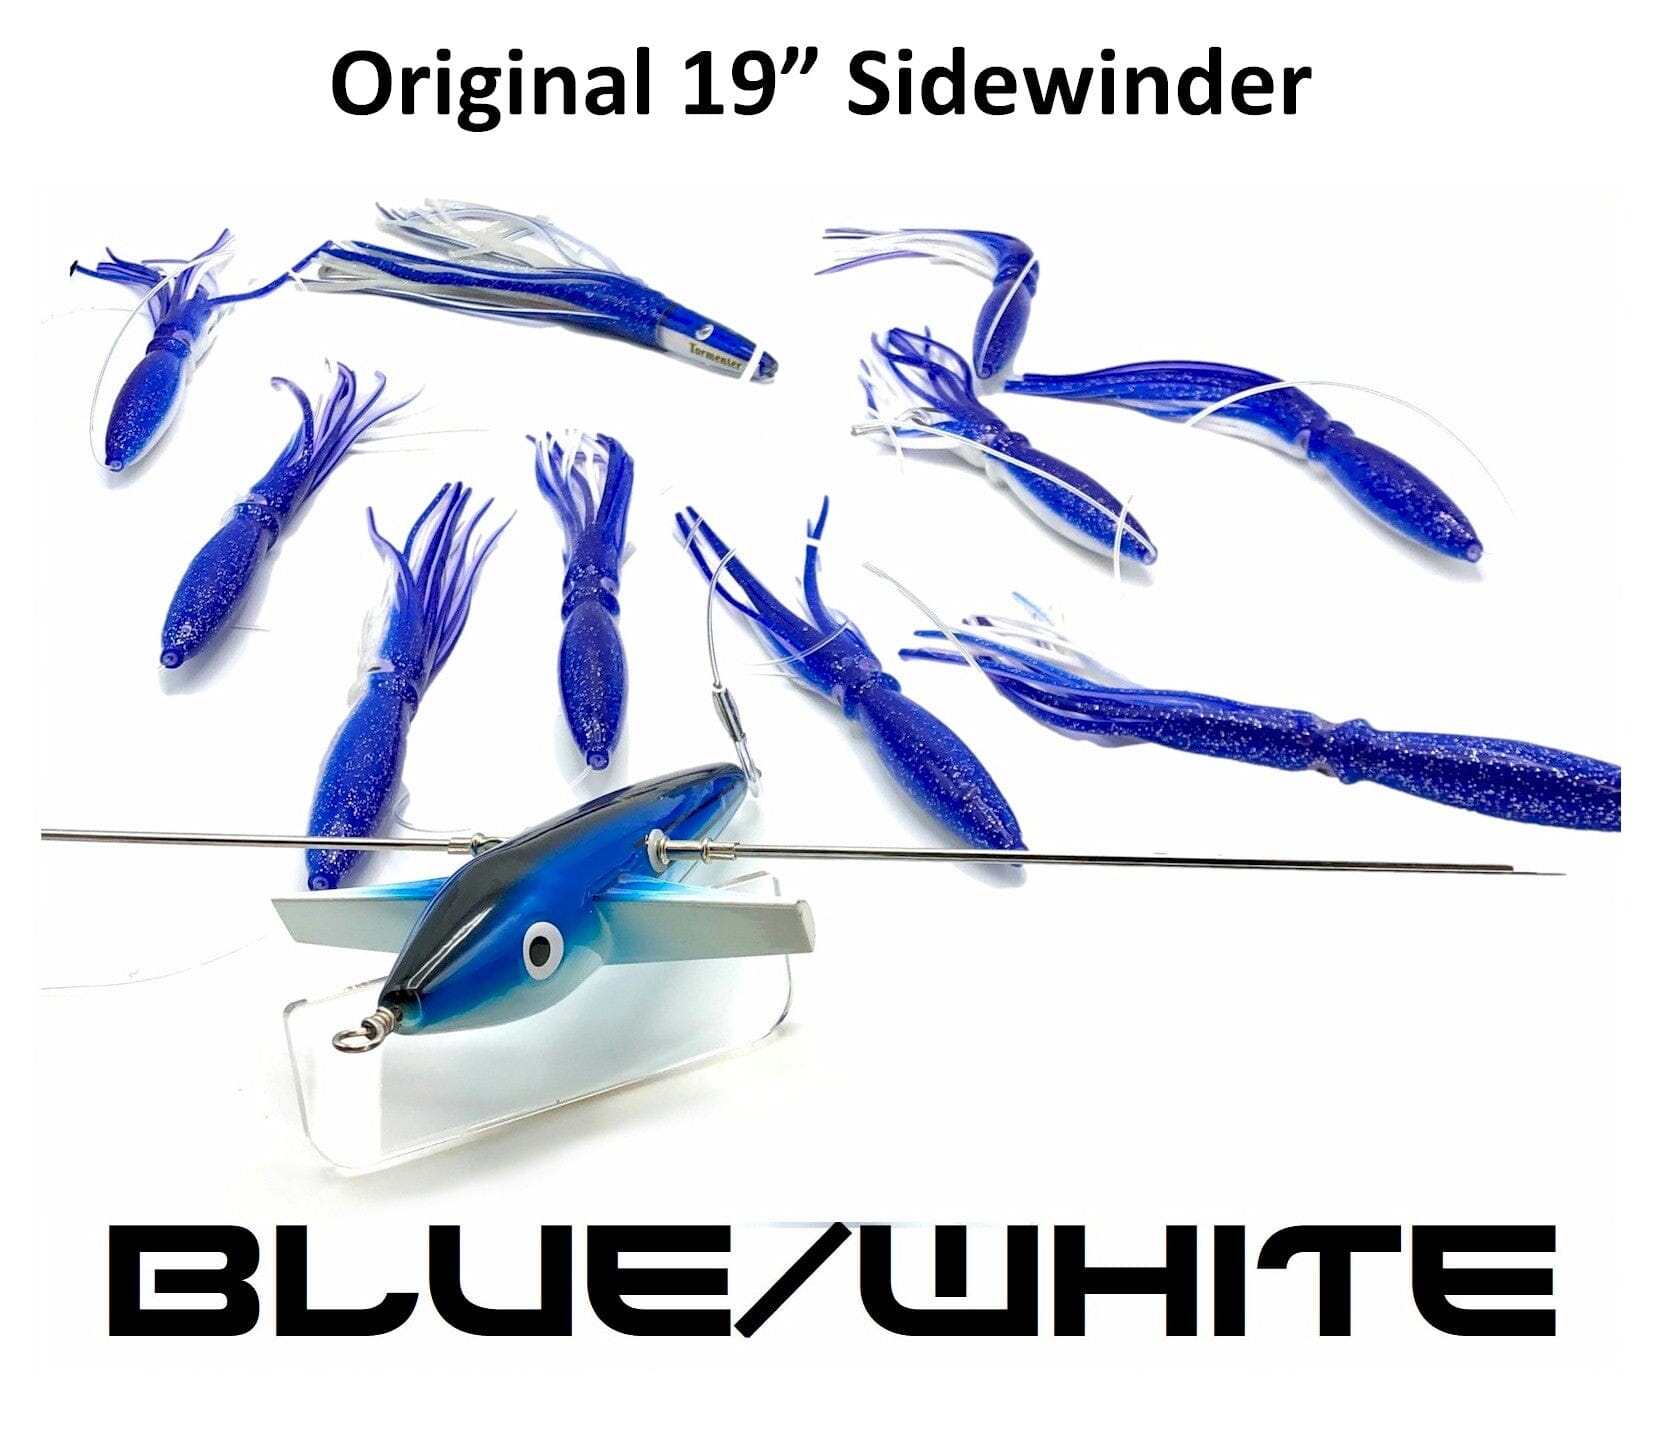 Williamson Lures Live Softie Bird Ballyhoo Combo All colors available